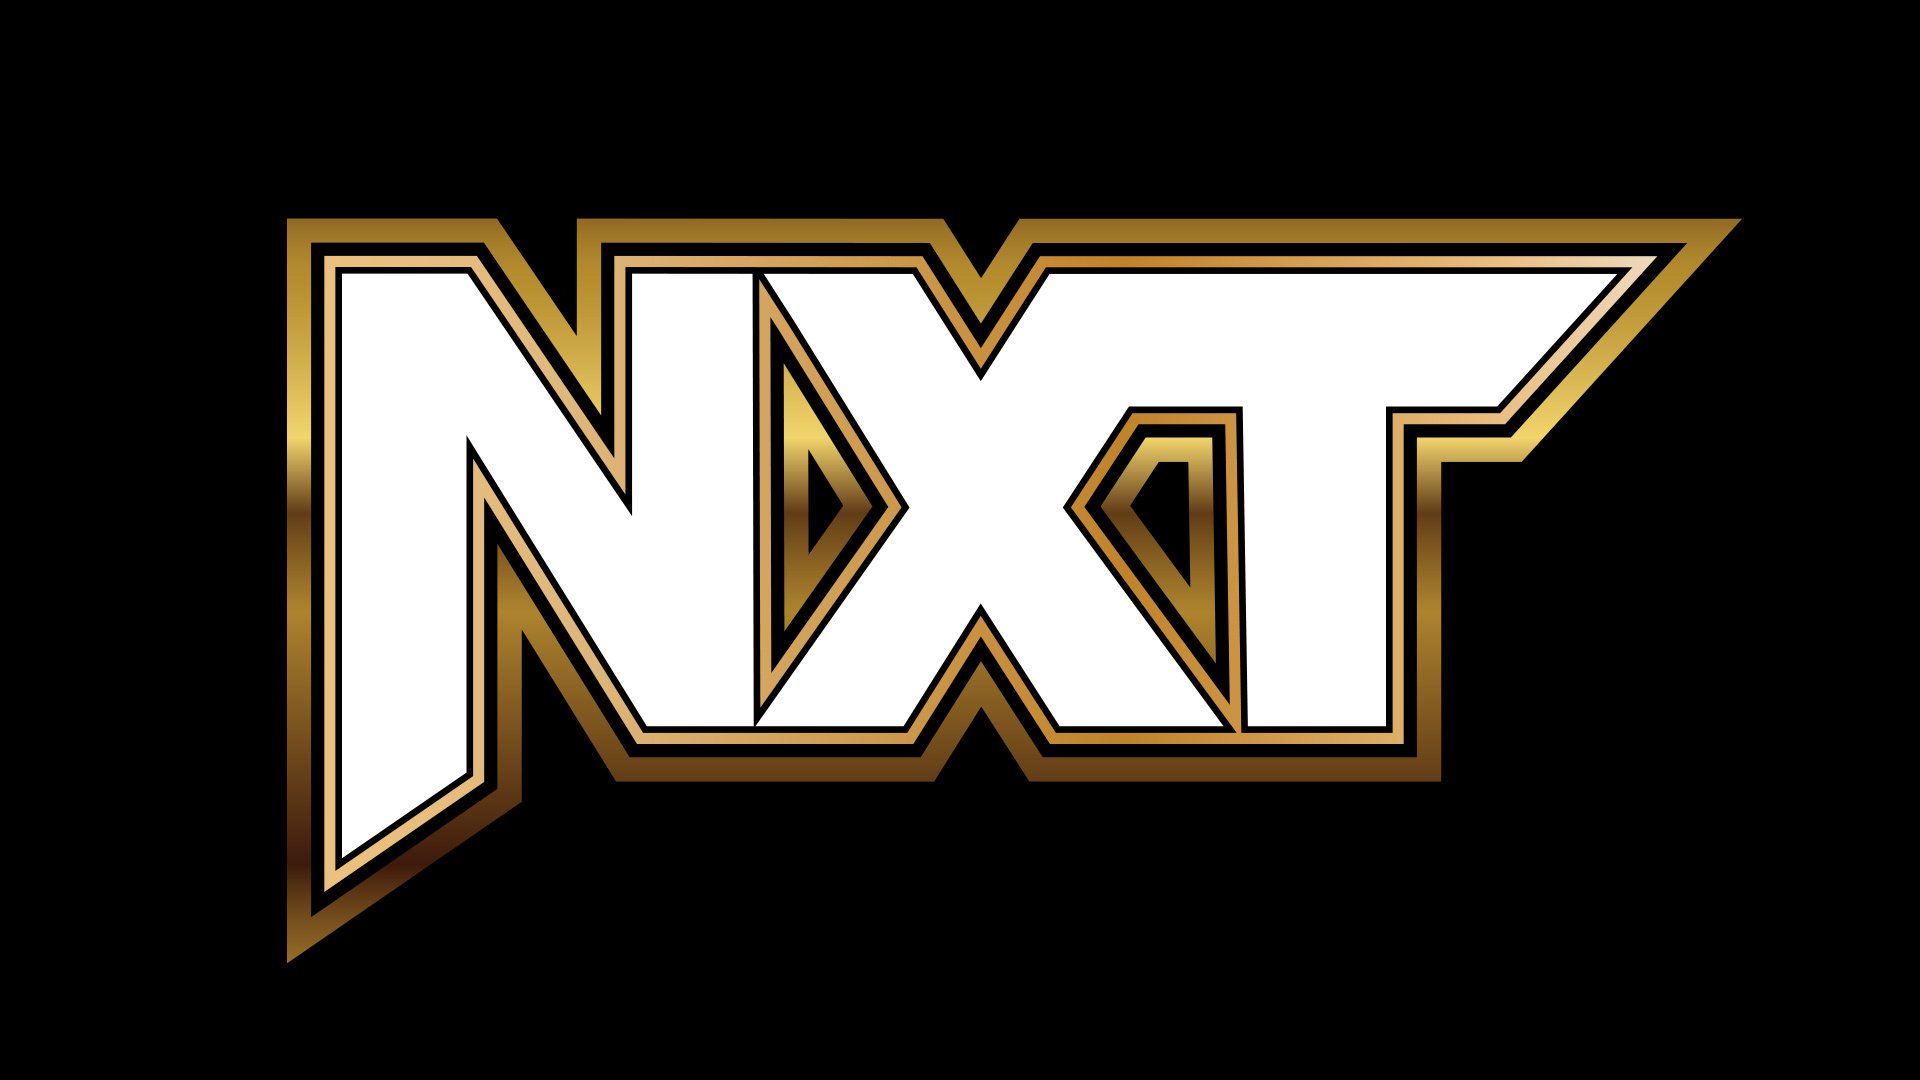 Heavy NXT Promotion Expected On RAW Next Week Ahead Of AEW Dynamite